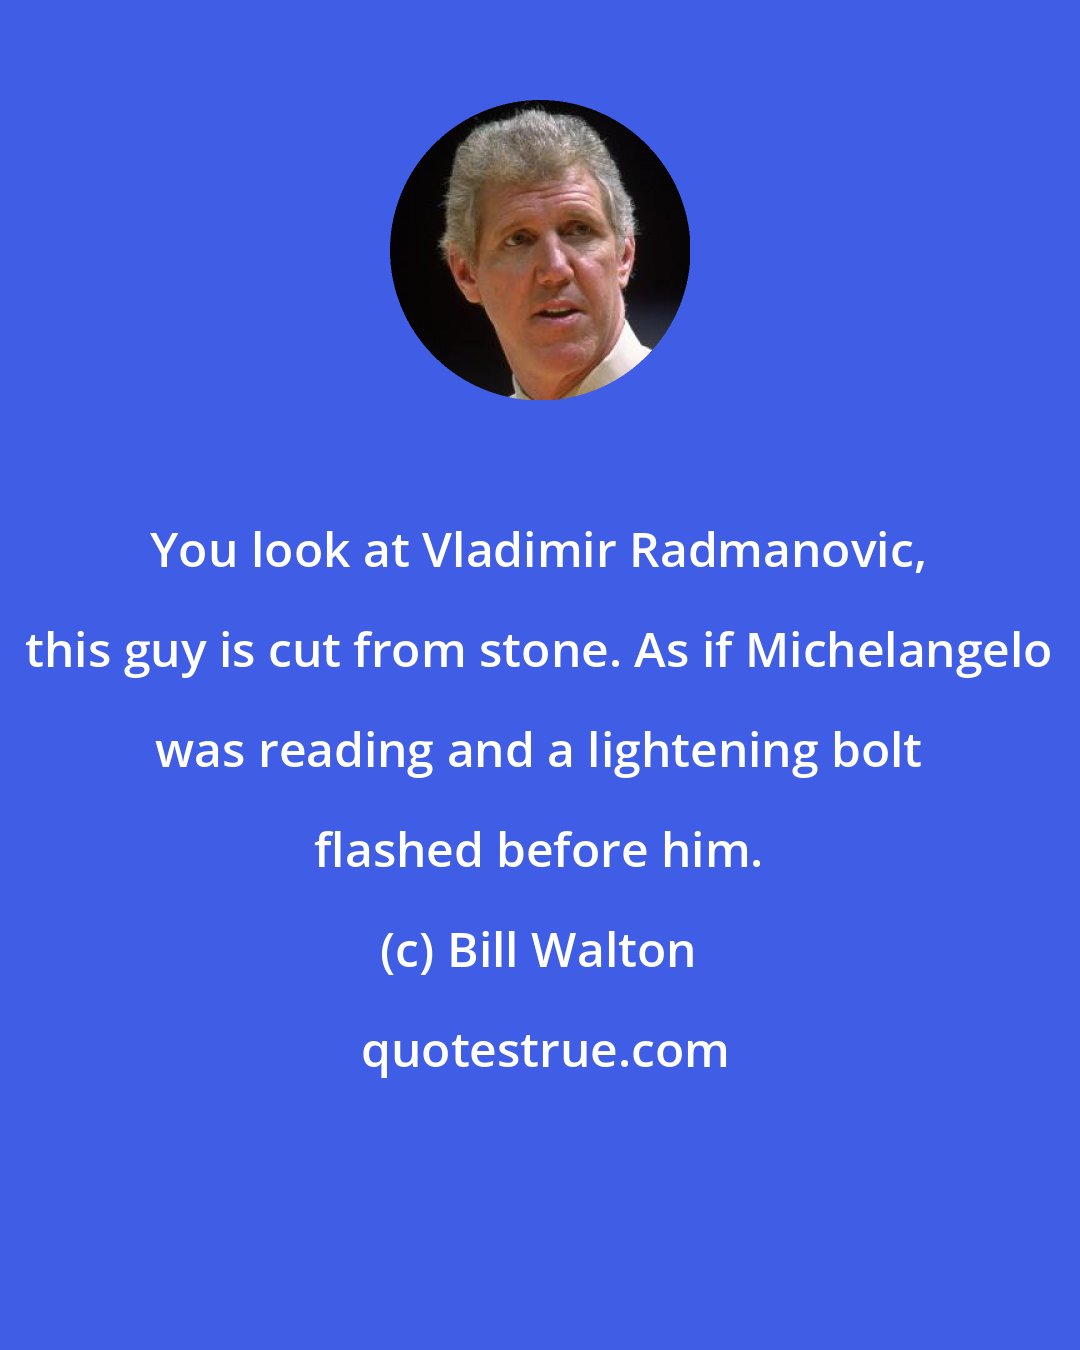 Bill Walton: You look at Vladimir Radmanovic, this guy is cut from stone. As if Michelangelo was reading and a lightening bolt flashed before him.